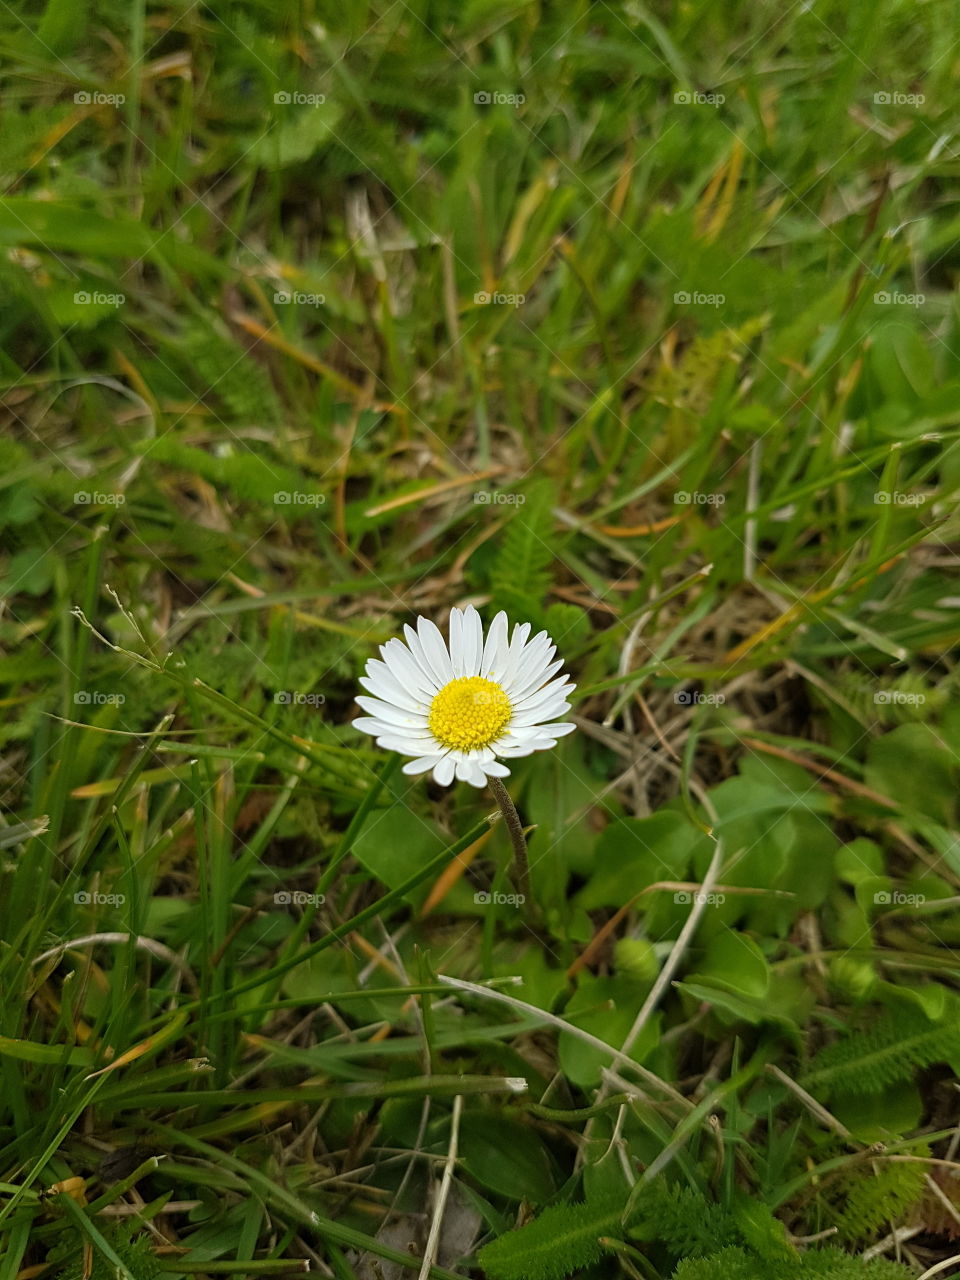 Flower blooming on grass